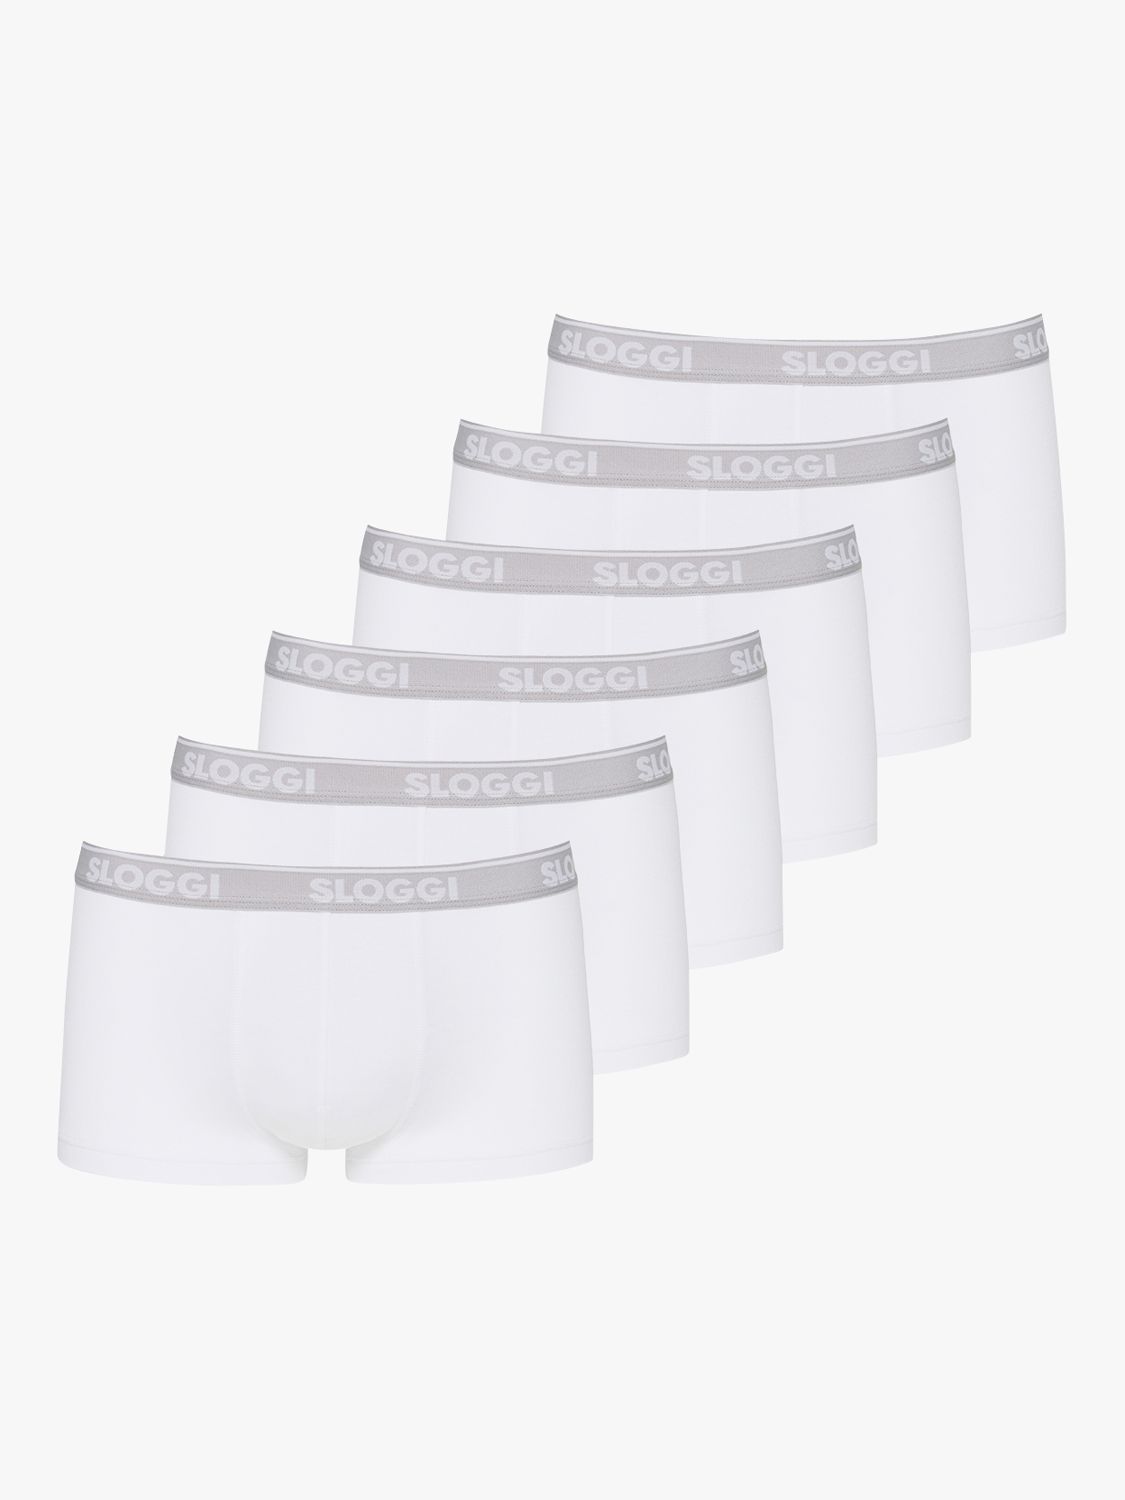 sloggi GO ABC Cotton Stretch Hipster Trunks, Pack of 6, White, L